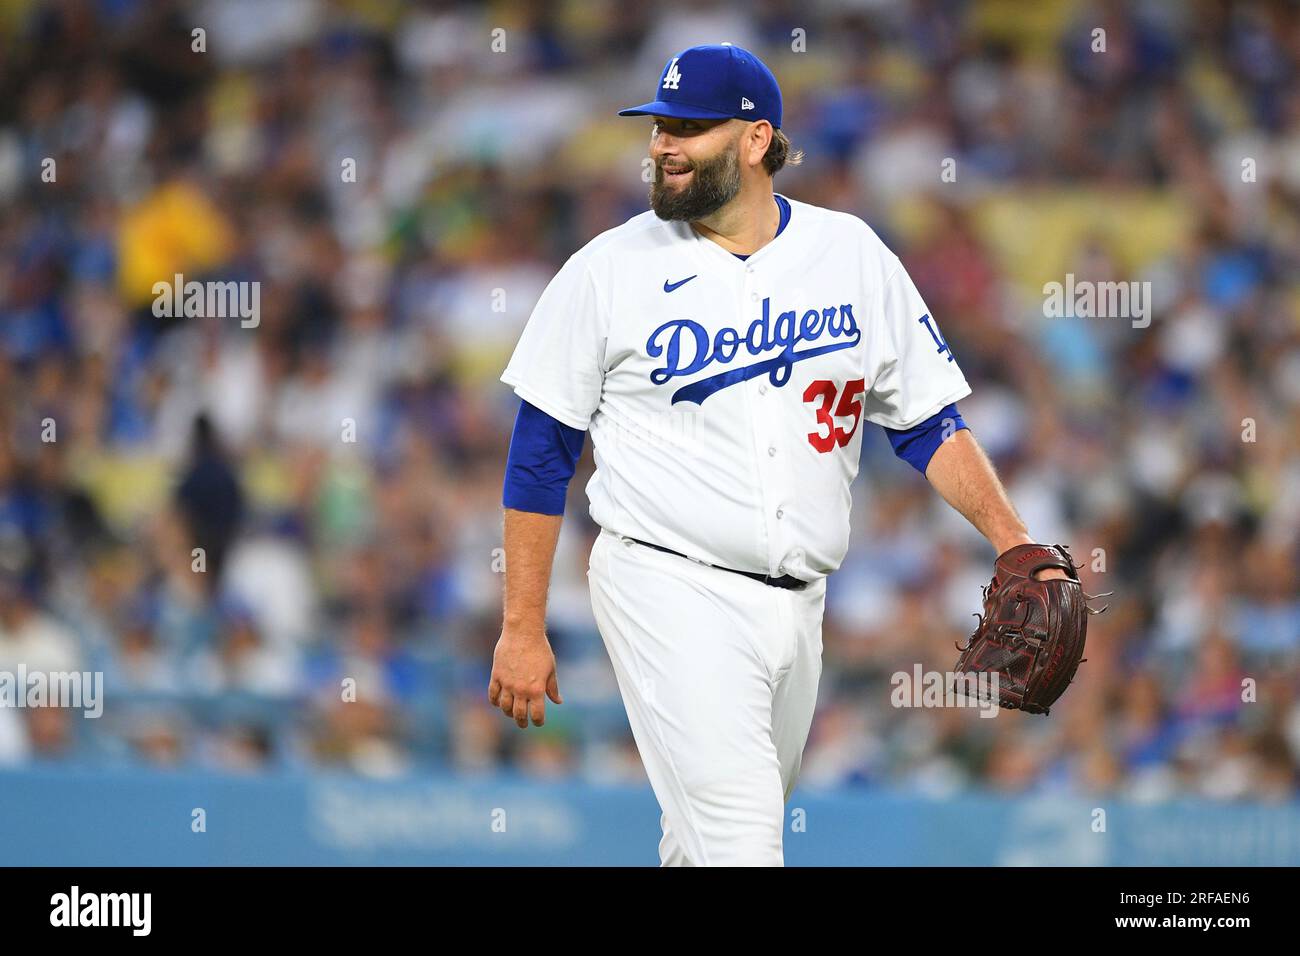 No. 35 on the field but No. 1 in - Los Angeles Dodgers